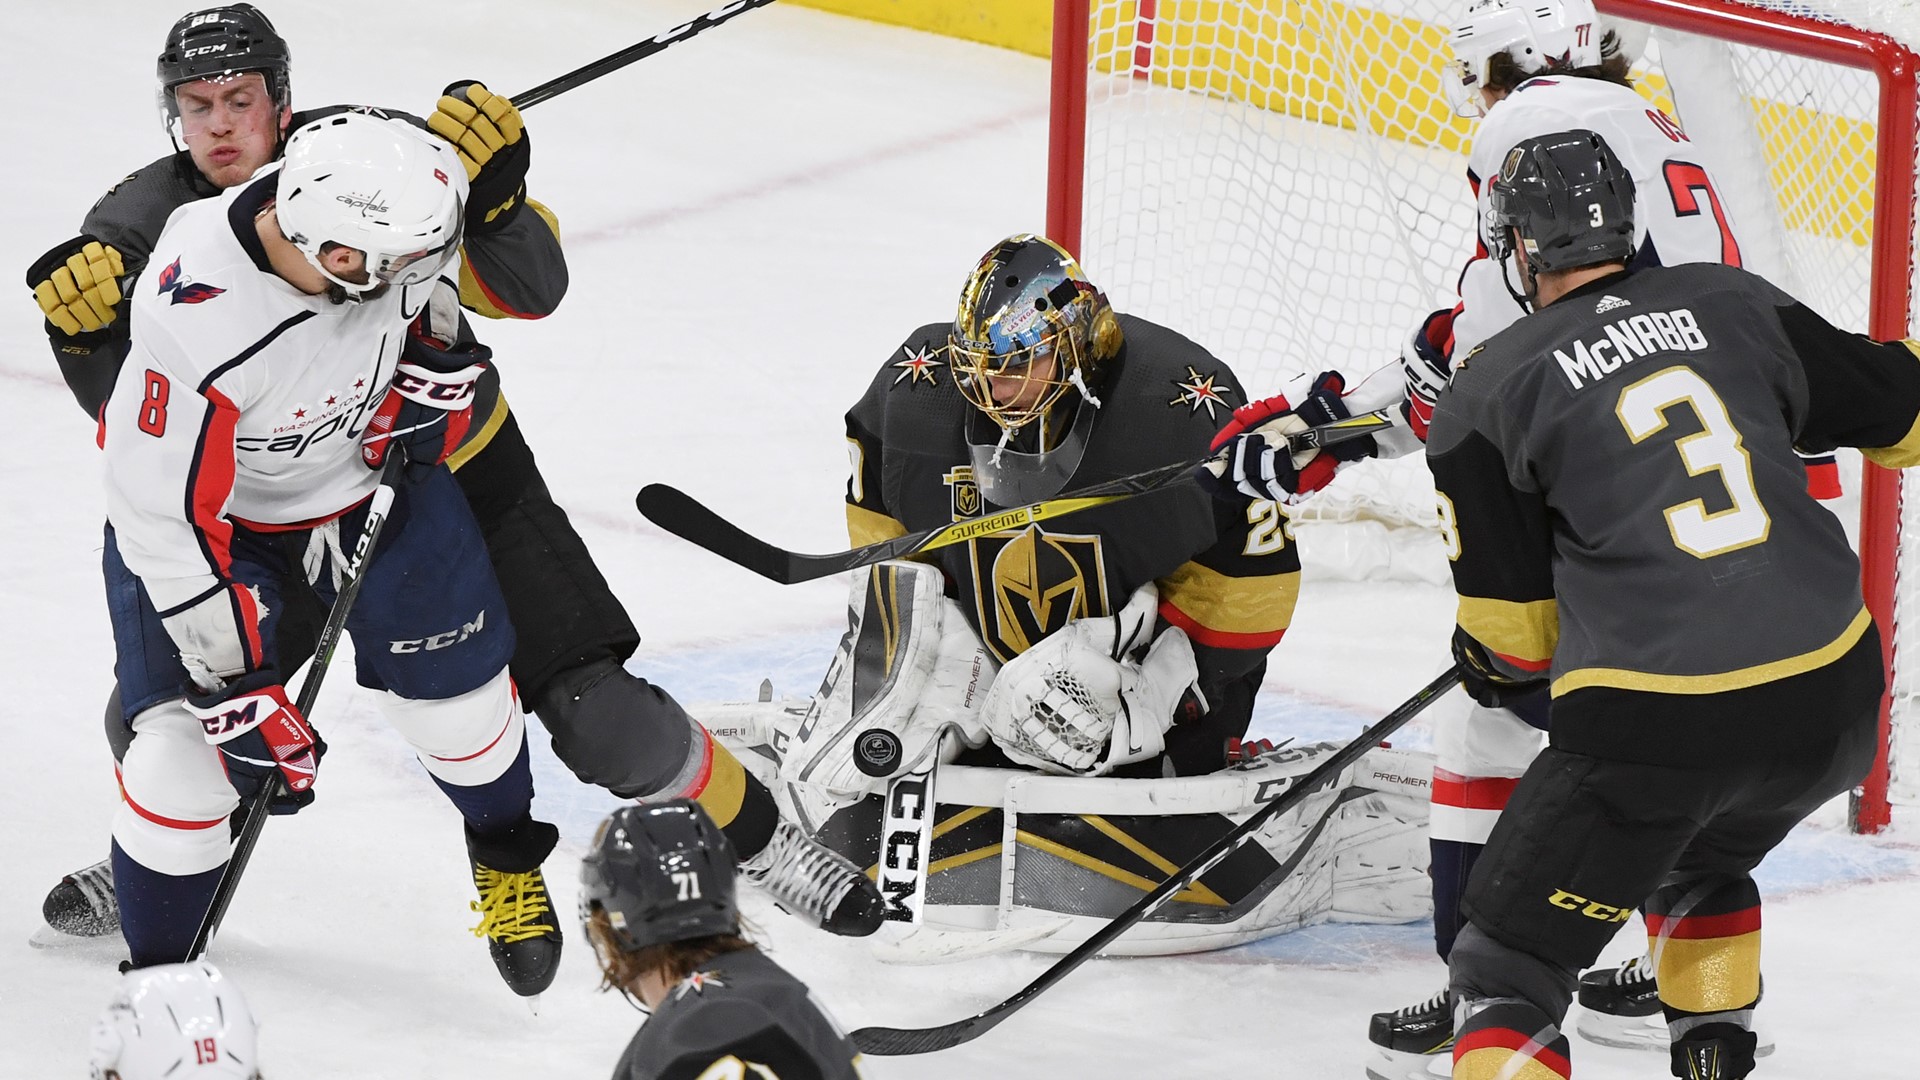 Vegas Golden Knights goalie Marc-Andre Fleury (29) makes a stop against the Washington Capitals